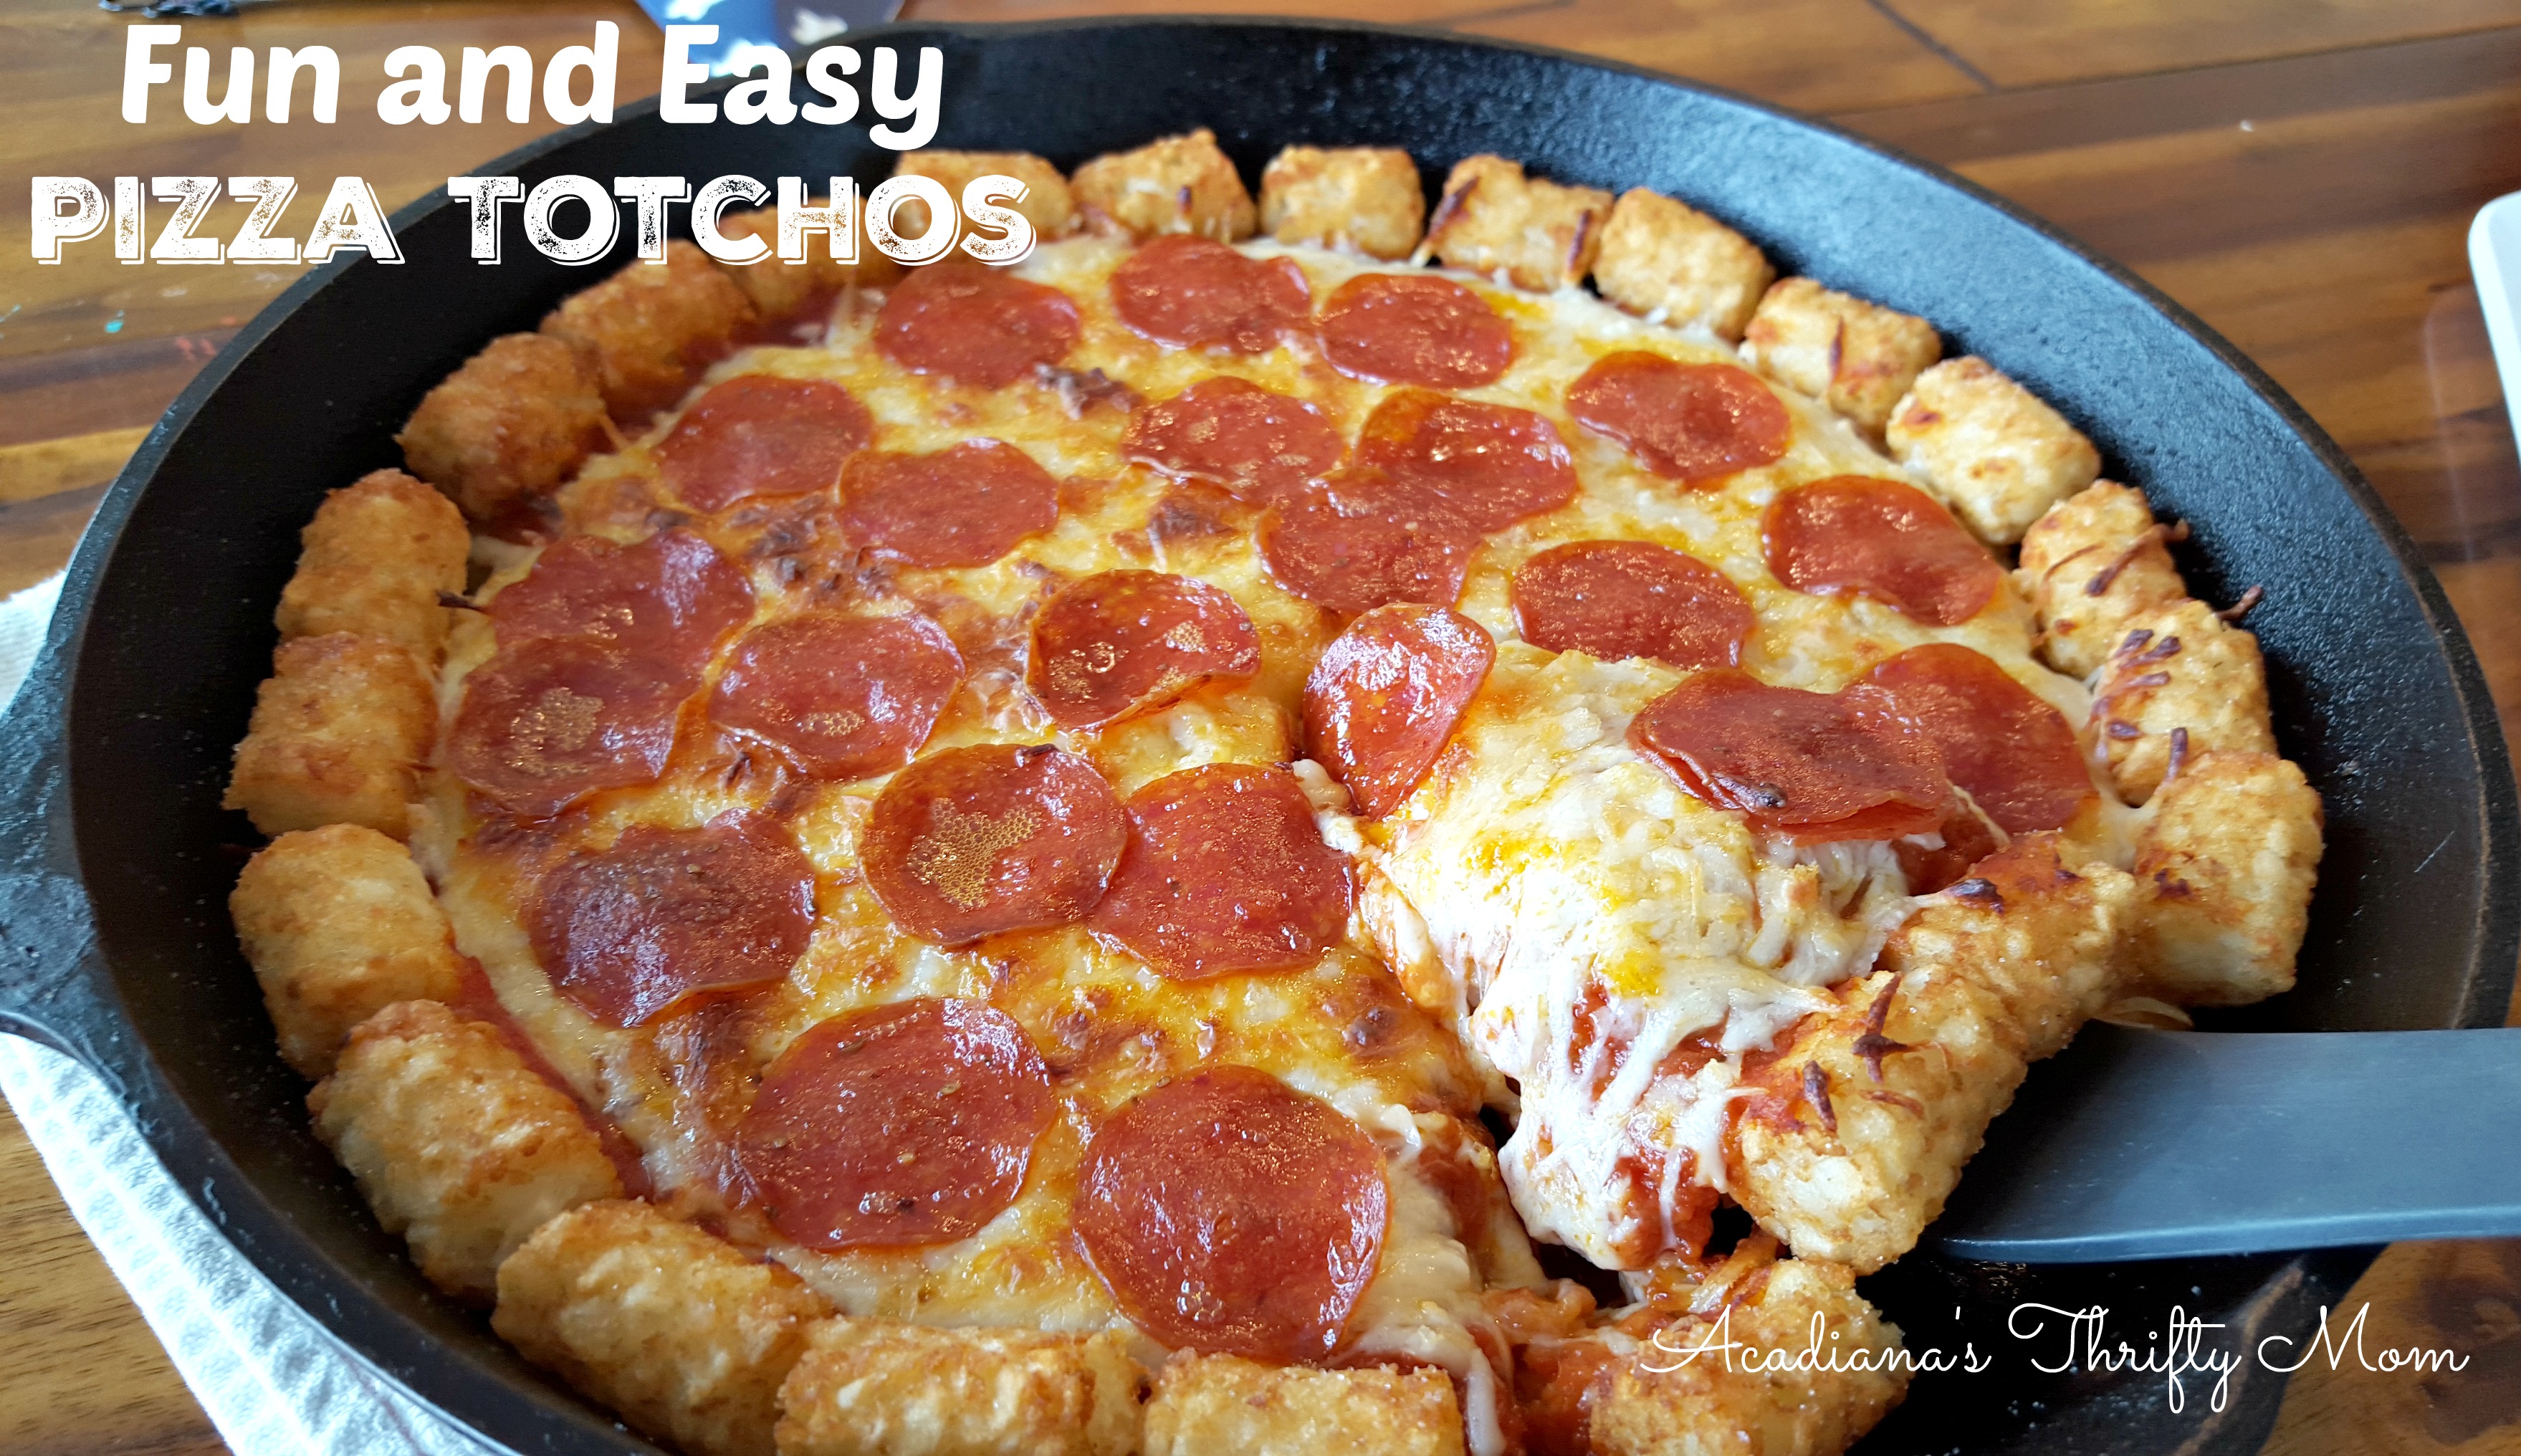 Fun and Easy Pizza Totchos